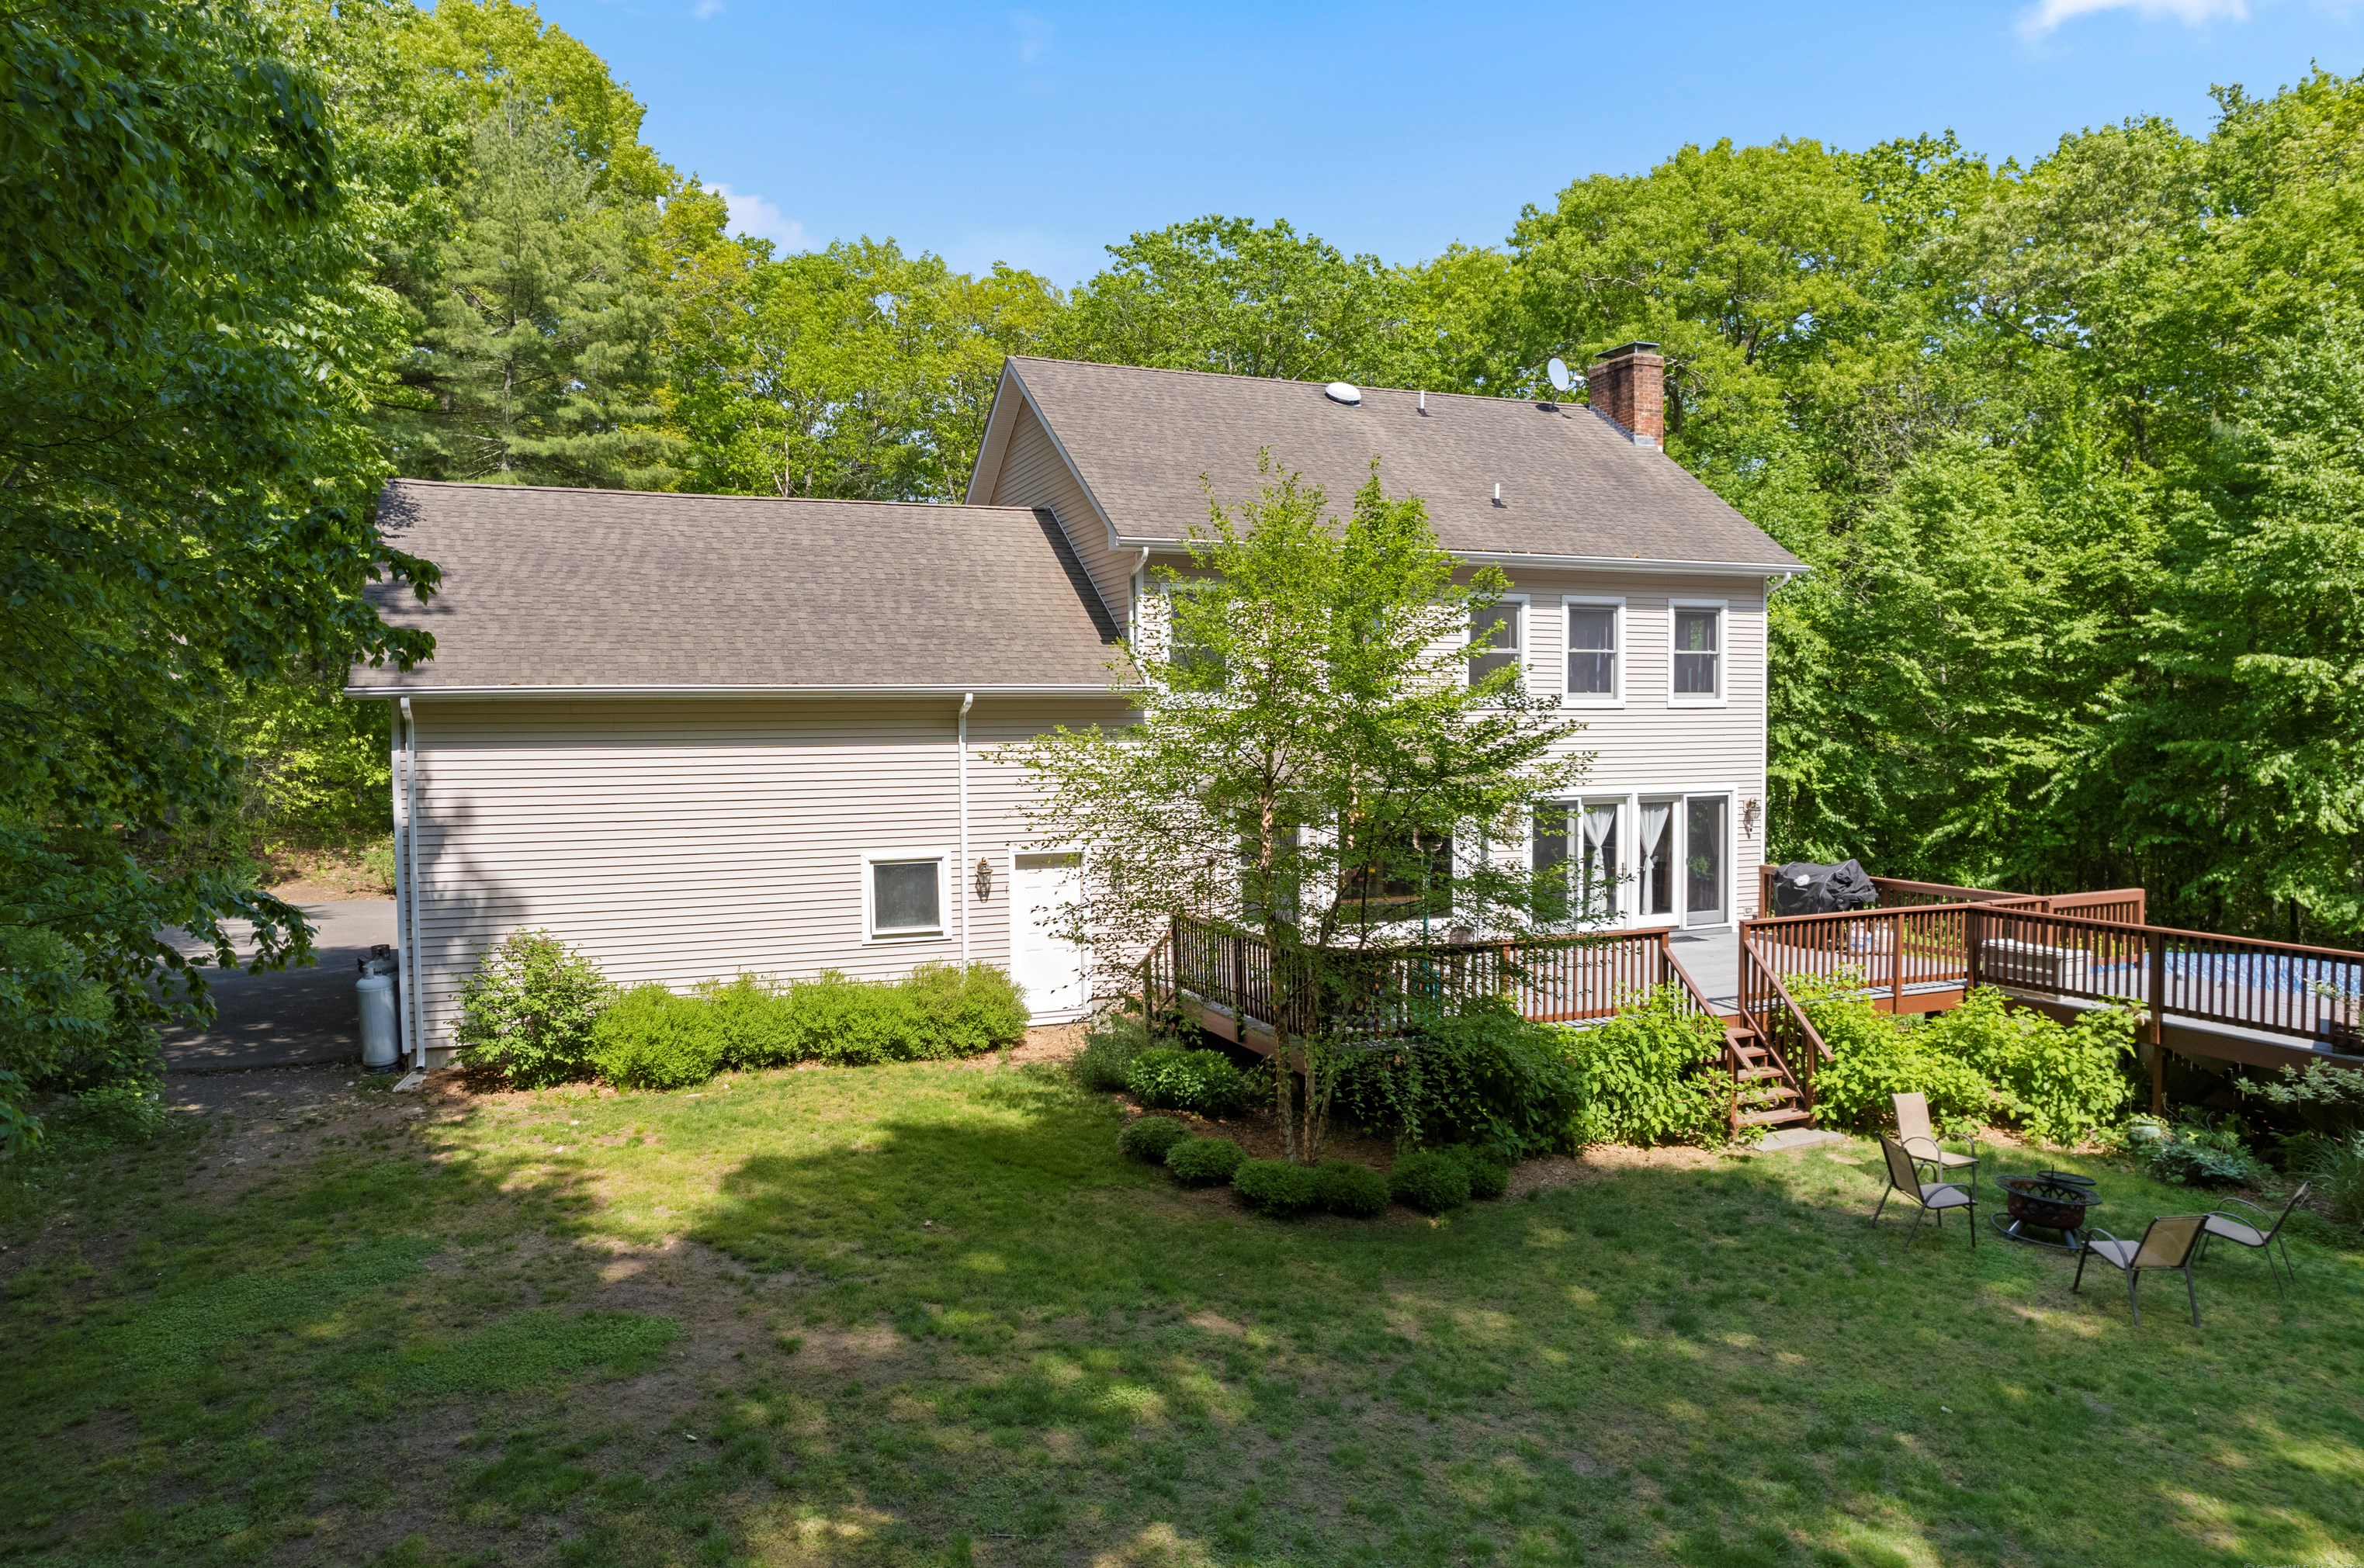 29 Cow Hill Rd, Deep River, CT 06419 exterior